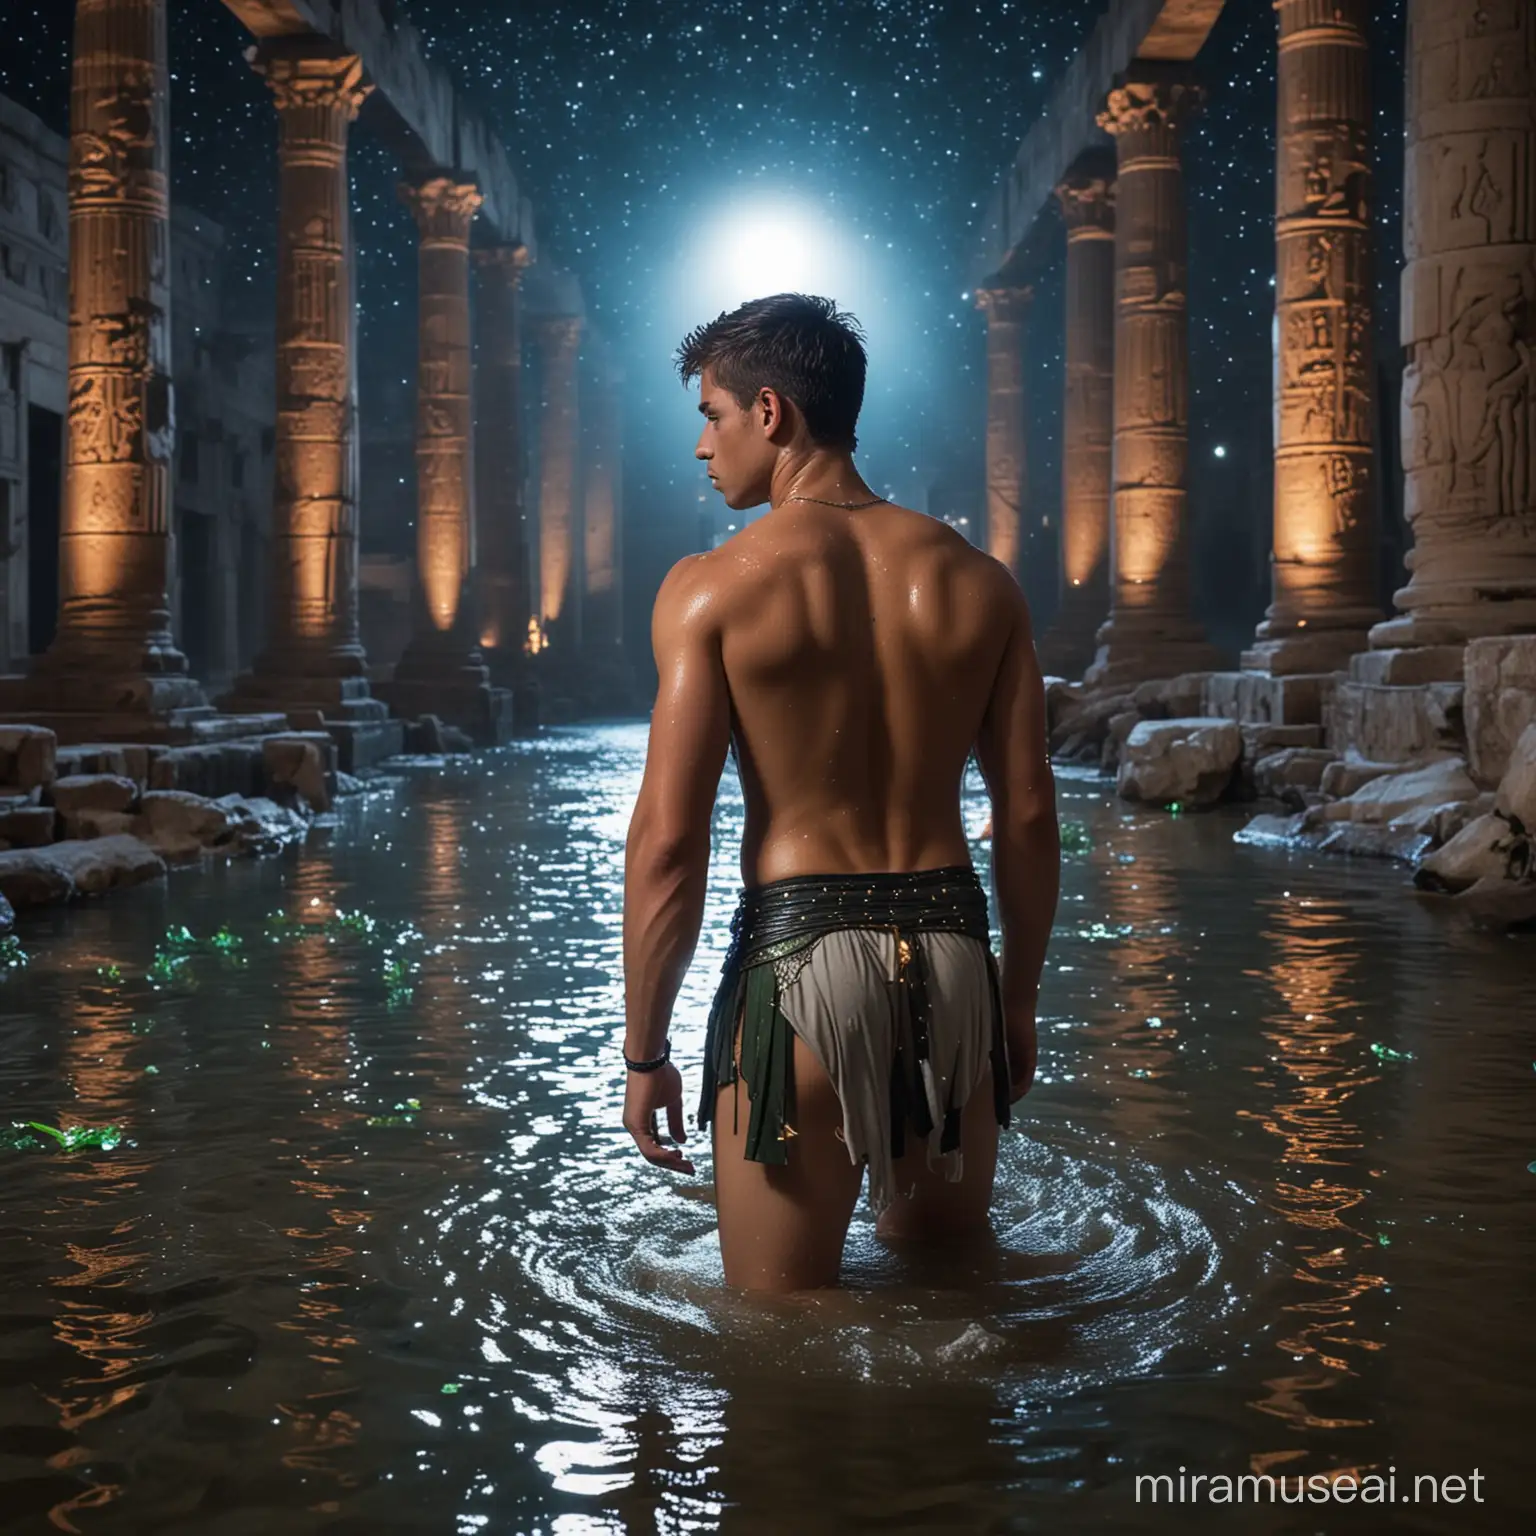 Sensual Roman Soldier Crouching in Oasis Ruins at Night